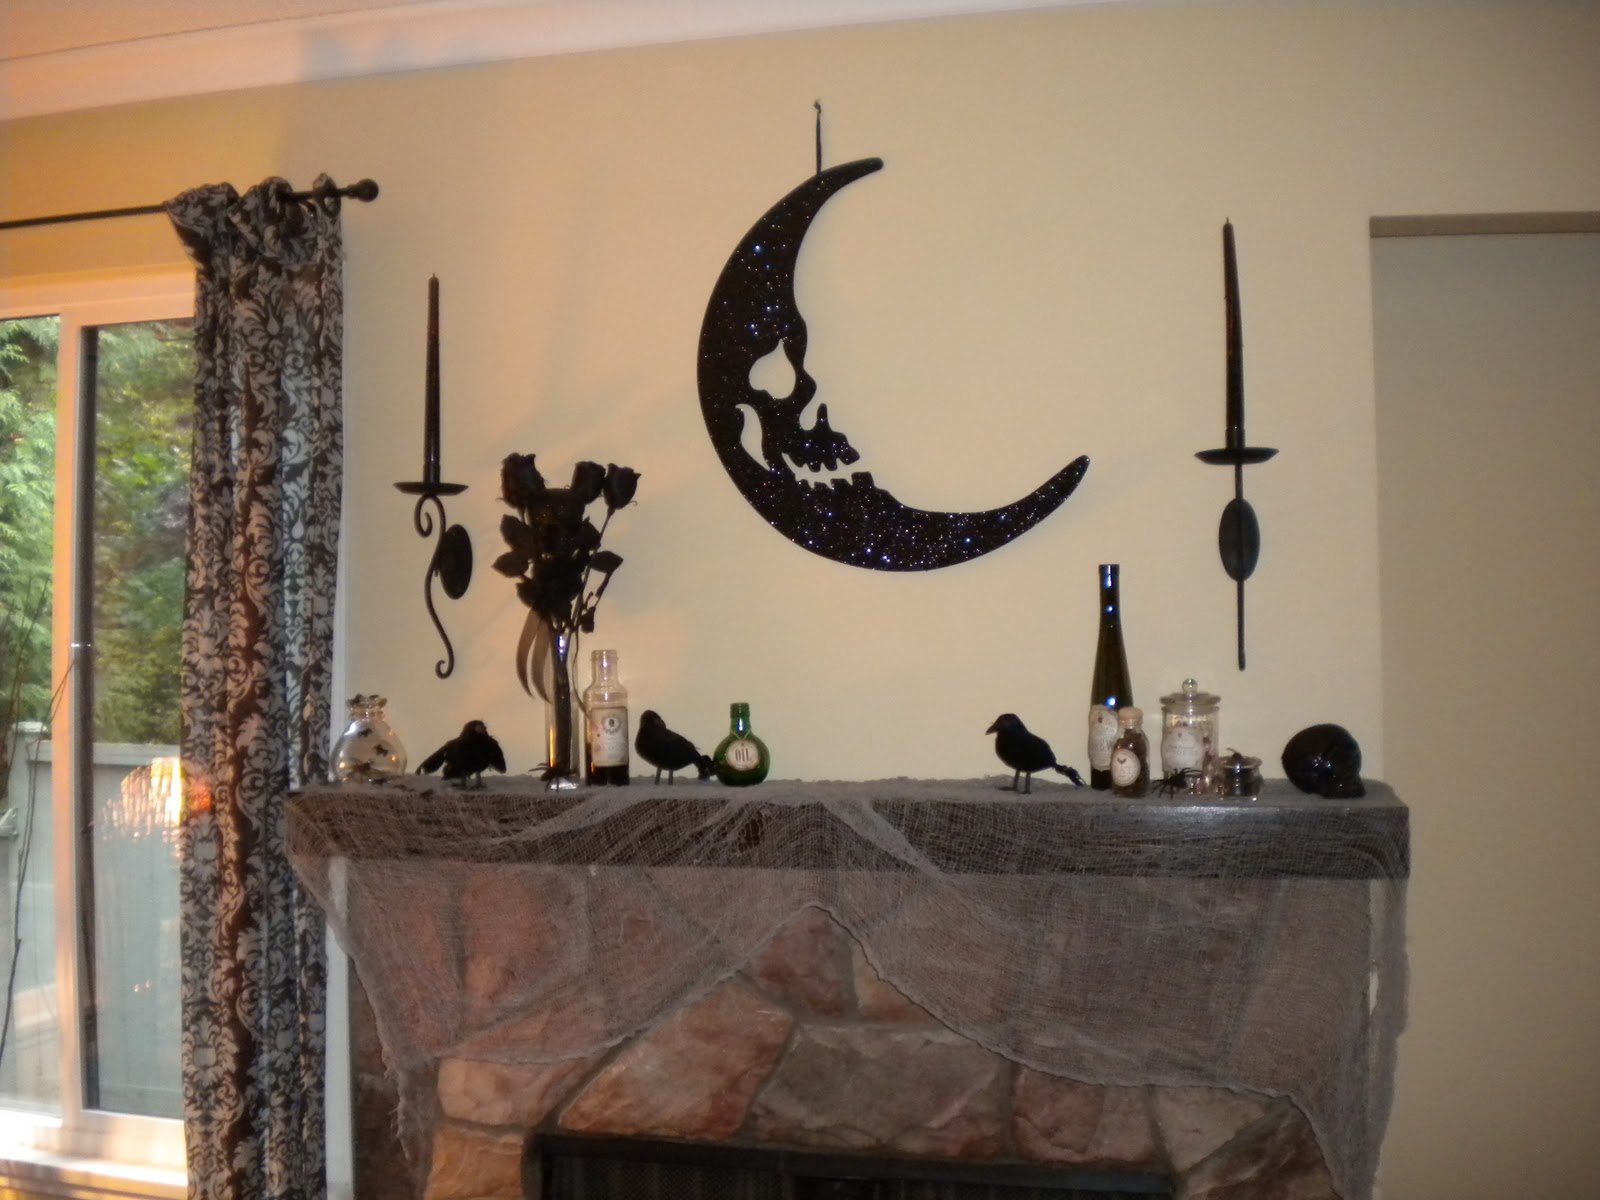 best-halloween-decorations-indoor-ideas-new-on-decor-gallery-with-white-square-table-with-glass-windows-and-black-curtain-plan-decoration-images-halloween-decorations-ideas.